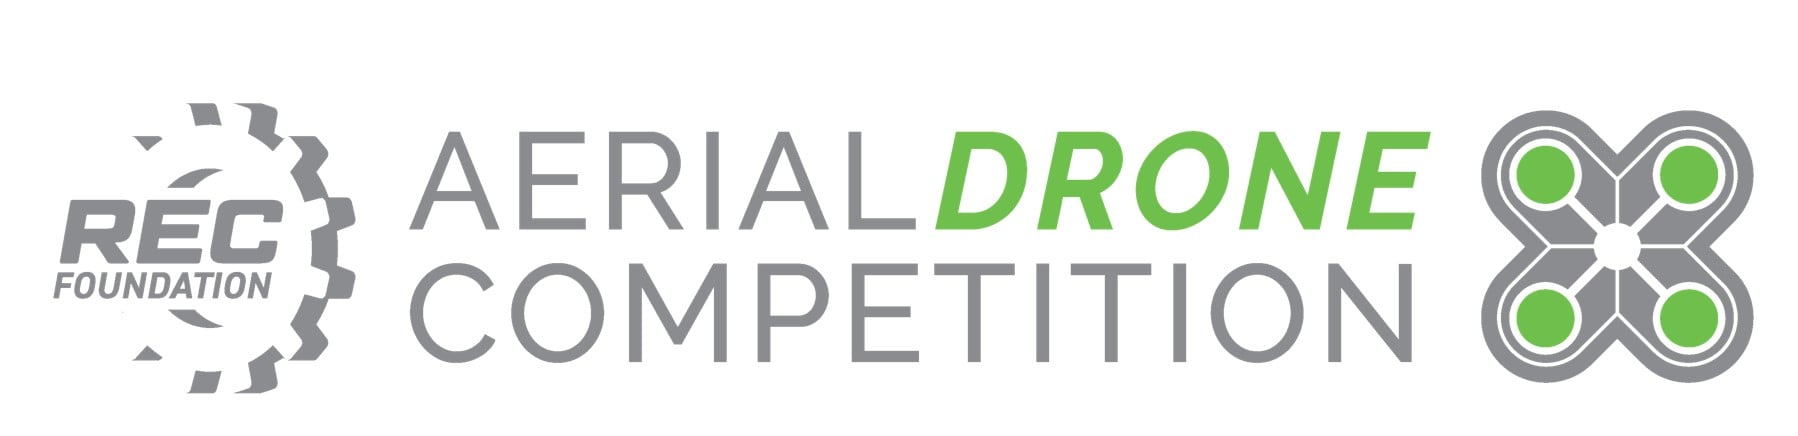 Aerial Drone Competition: Starting a Team Webinar and Q&A  - Wednesday 10/19 - 7:15 pm Central Time - Hosted by the REC Foundation